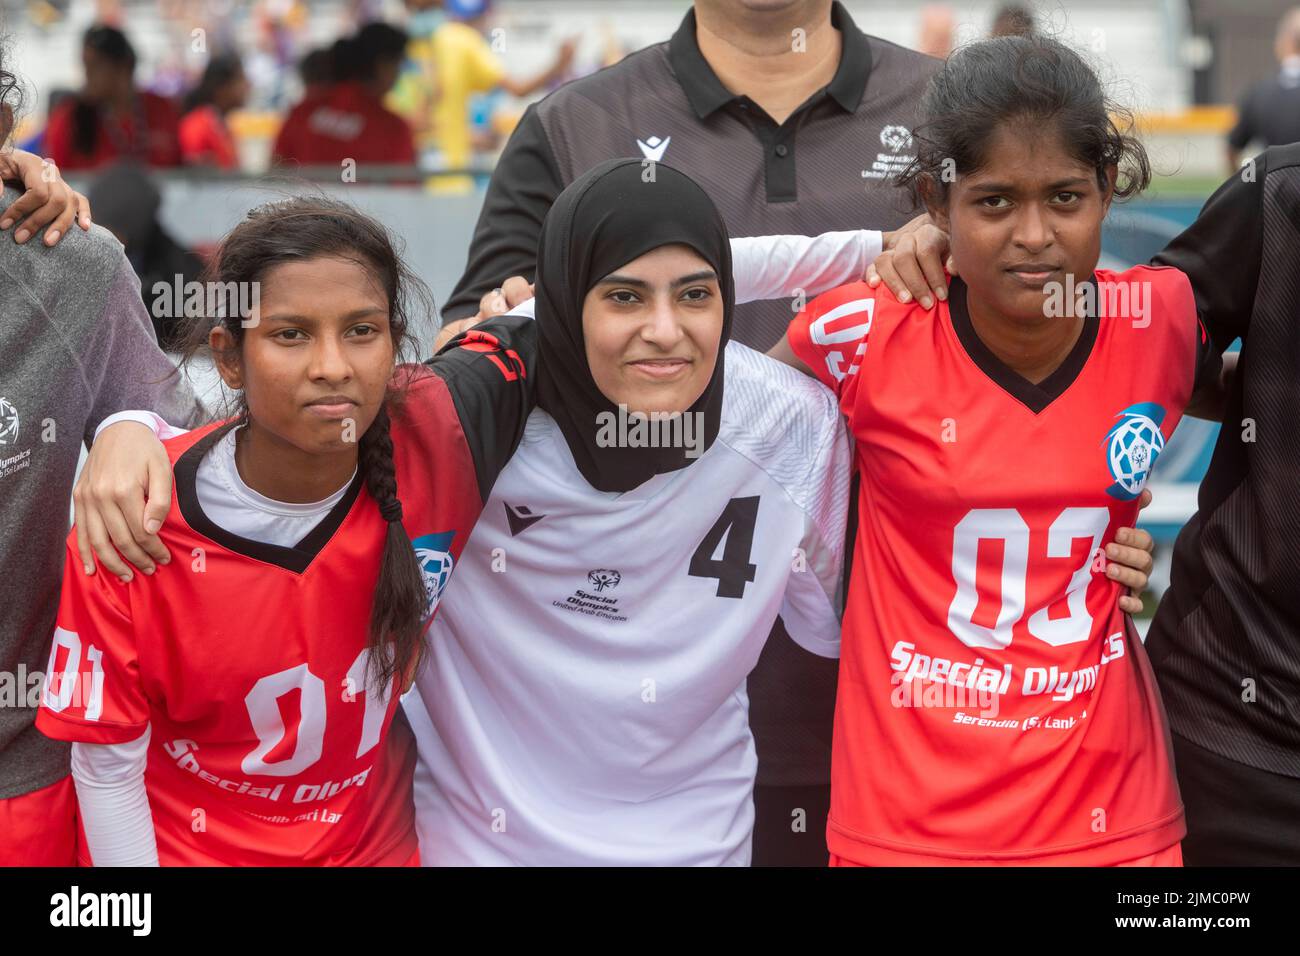 Detroit, Michigan - The women's teams of the United Arab Emirates and Sri Lanka pose for a picture after their match in the Special Olympics Unified C Stock Photo